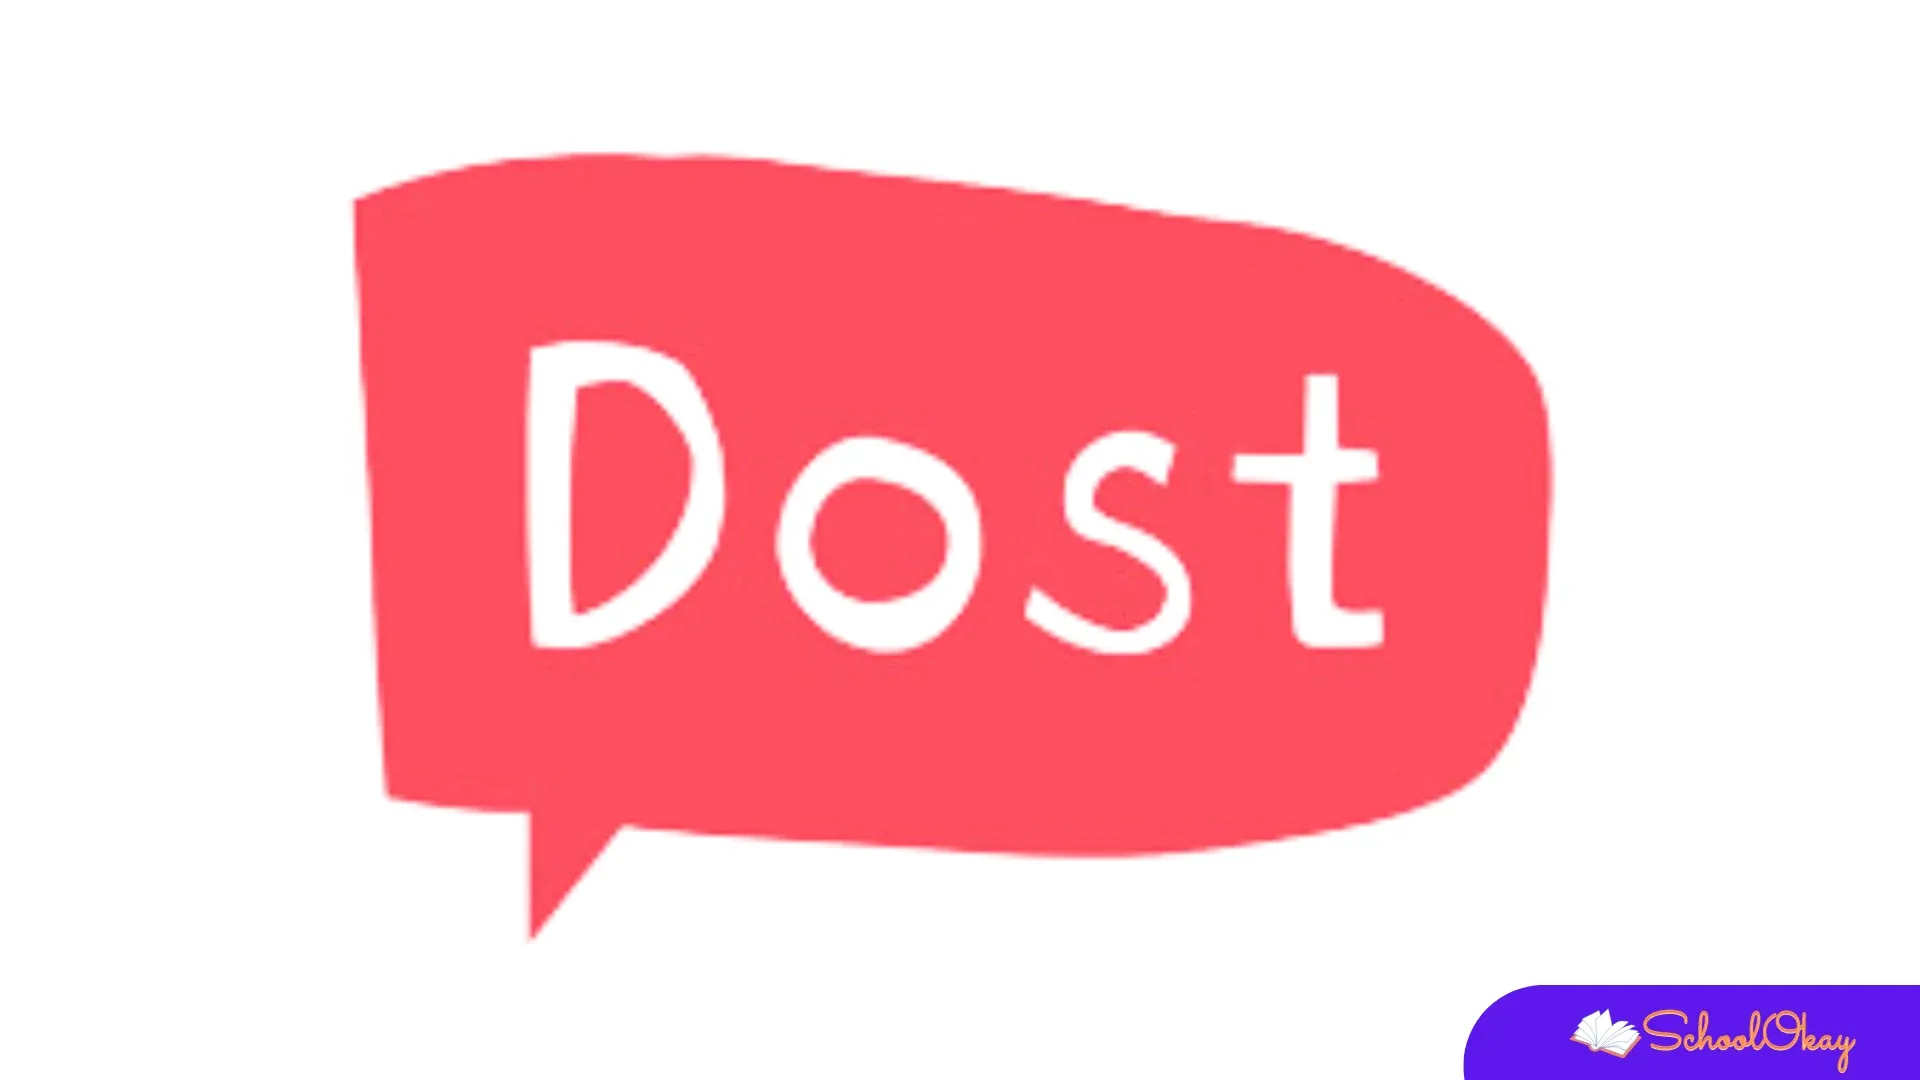 Dost